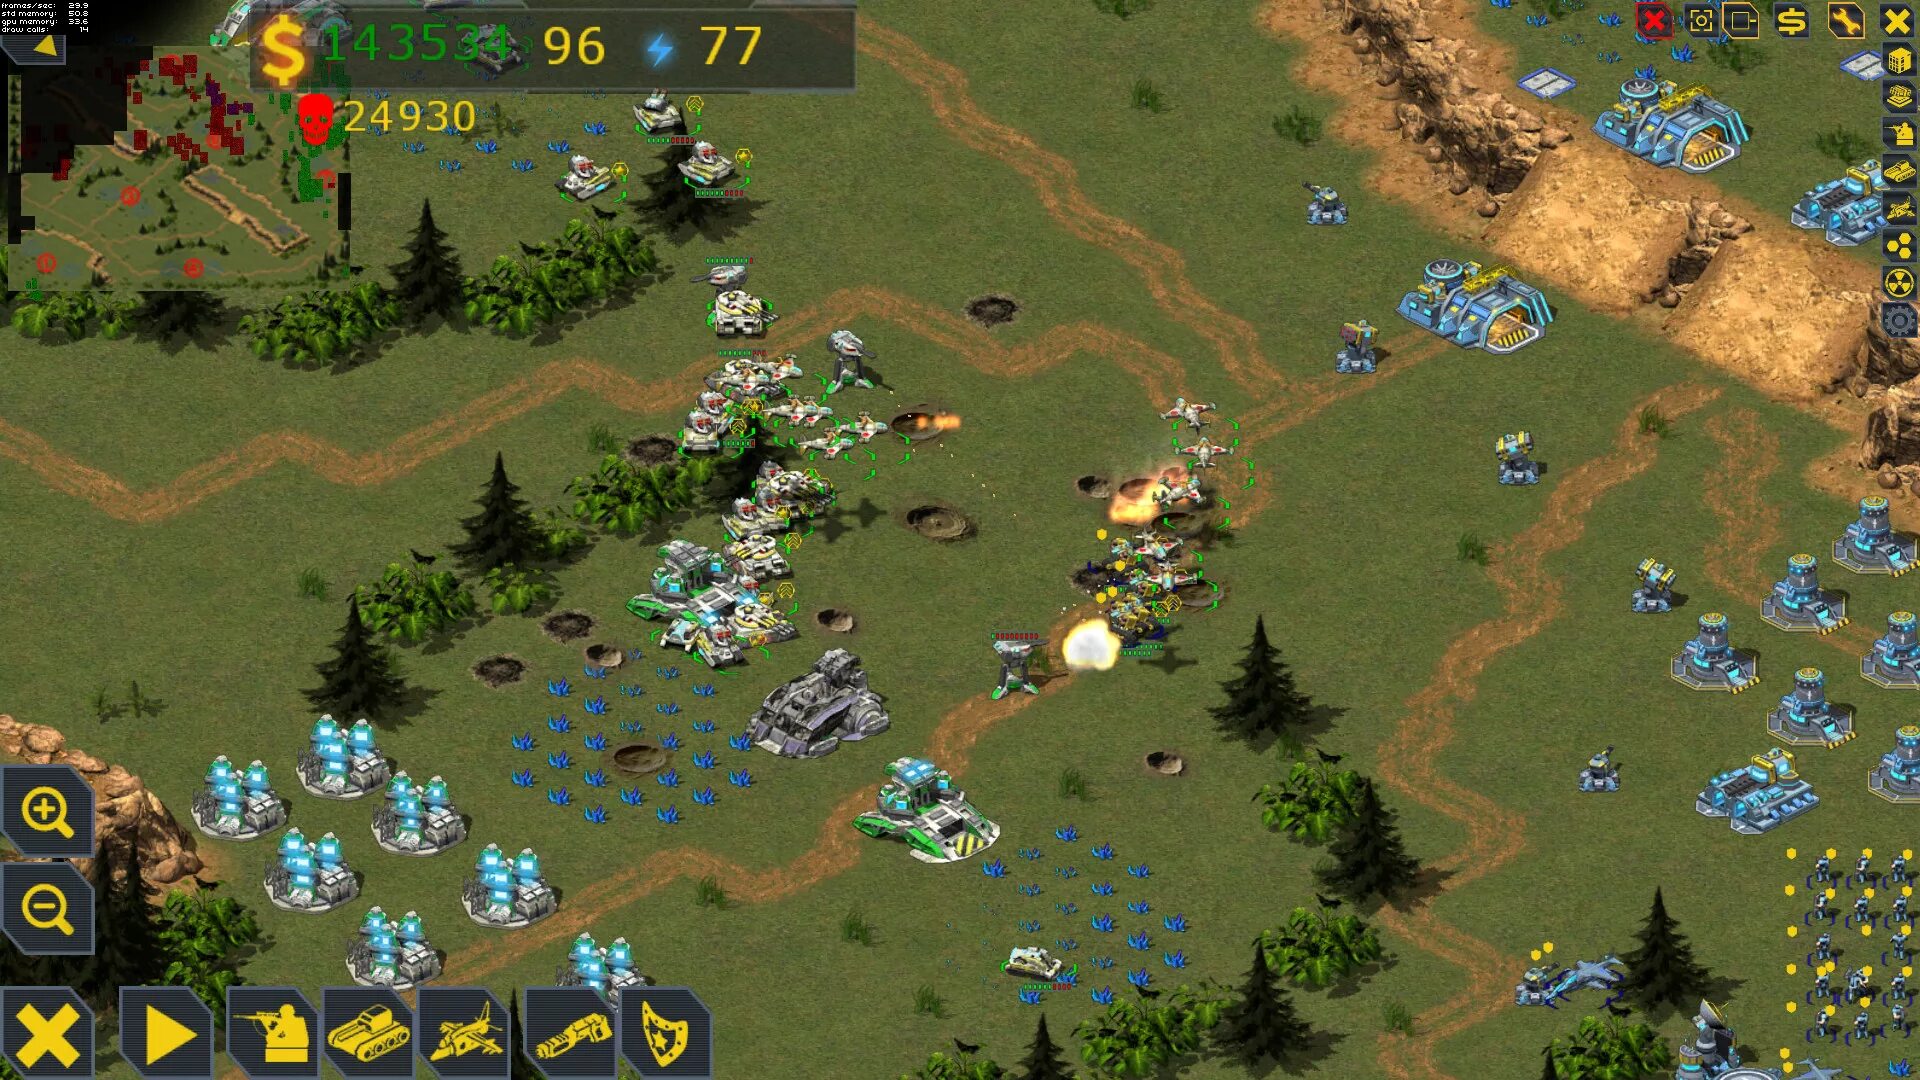 Rts. Redsun RTS. Redsun RTS юниты. Redsun RTS Premium Android. RTS игр (real-time Strategy).